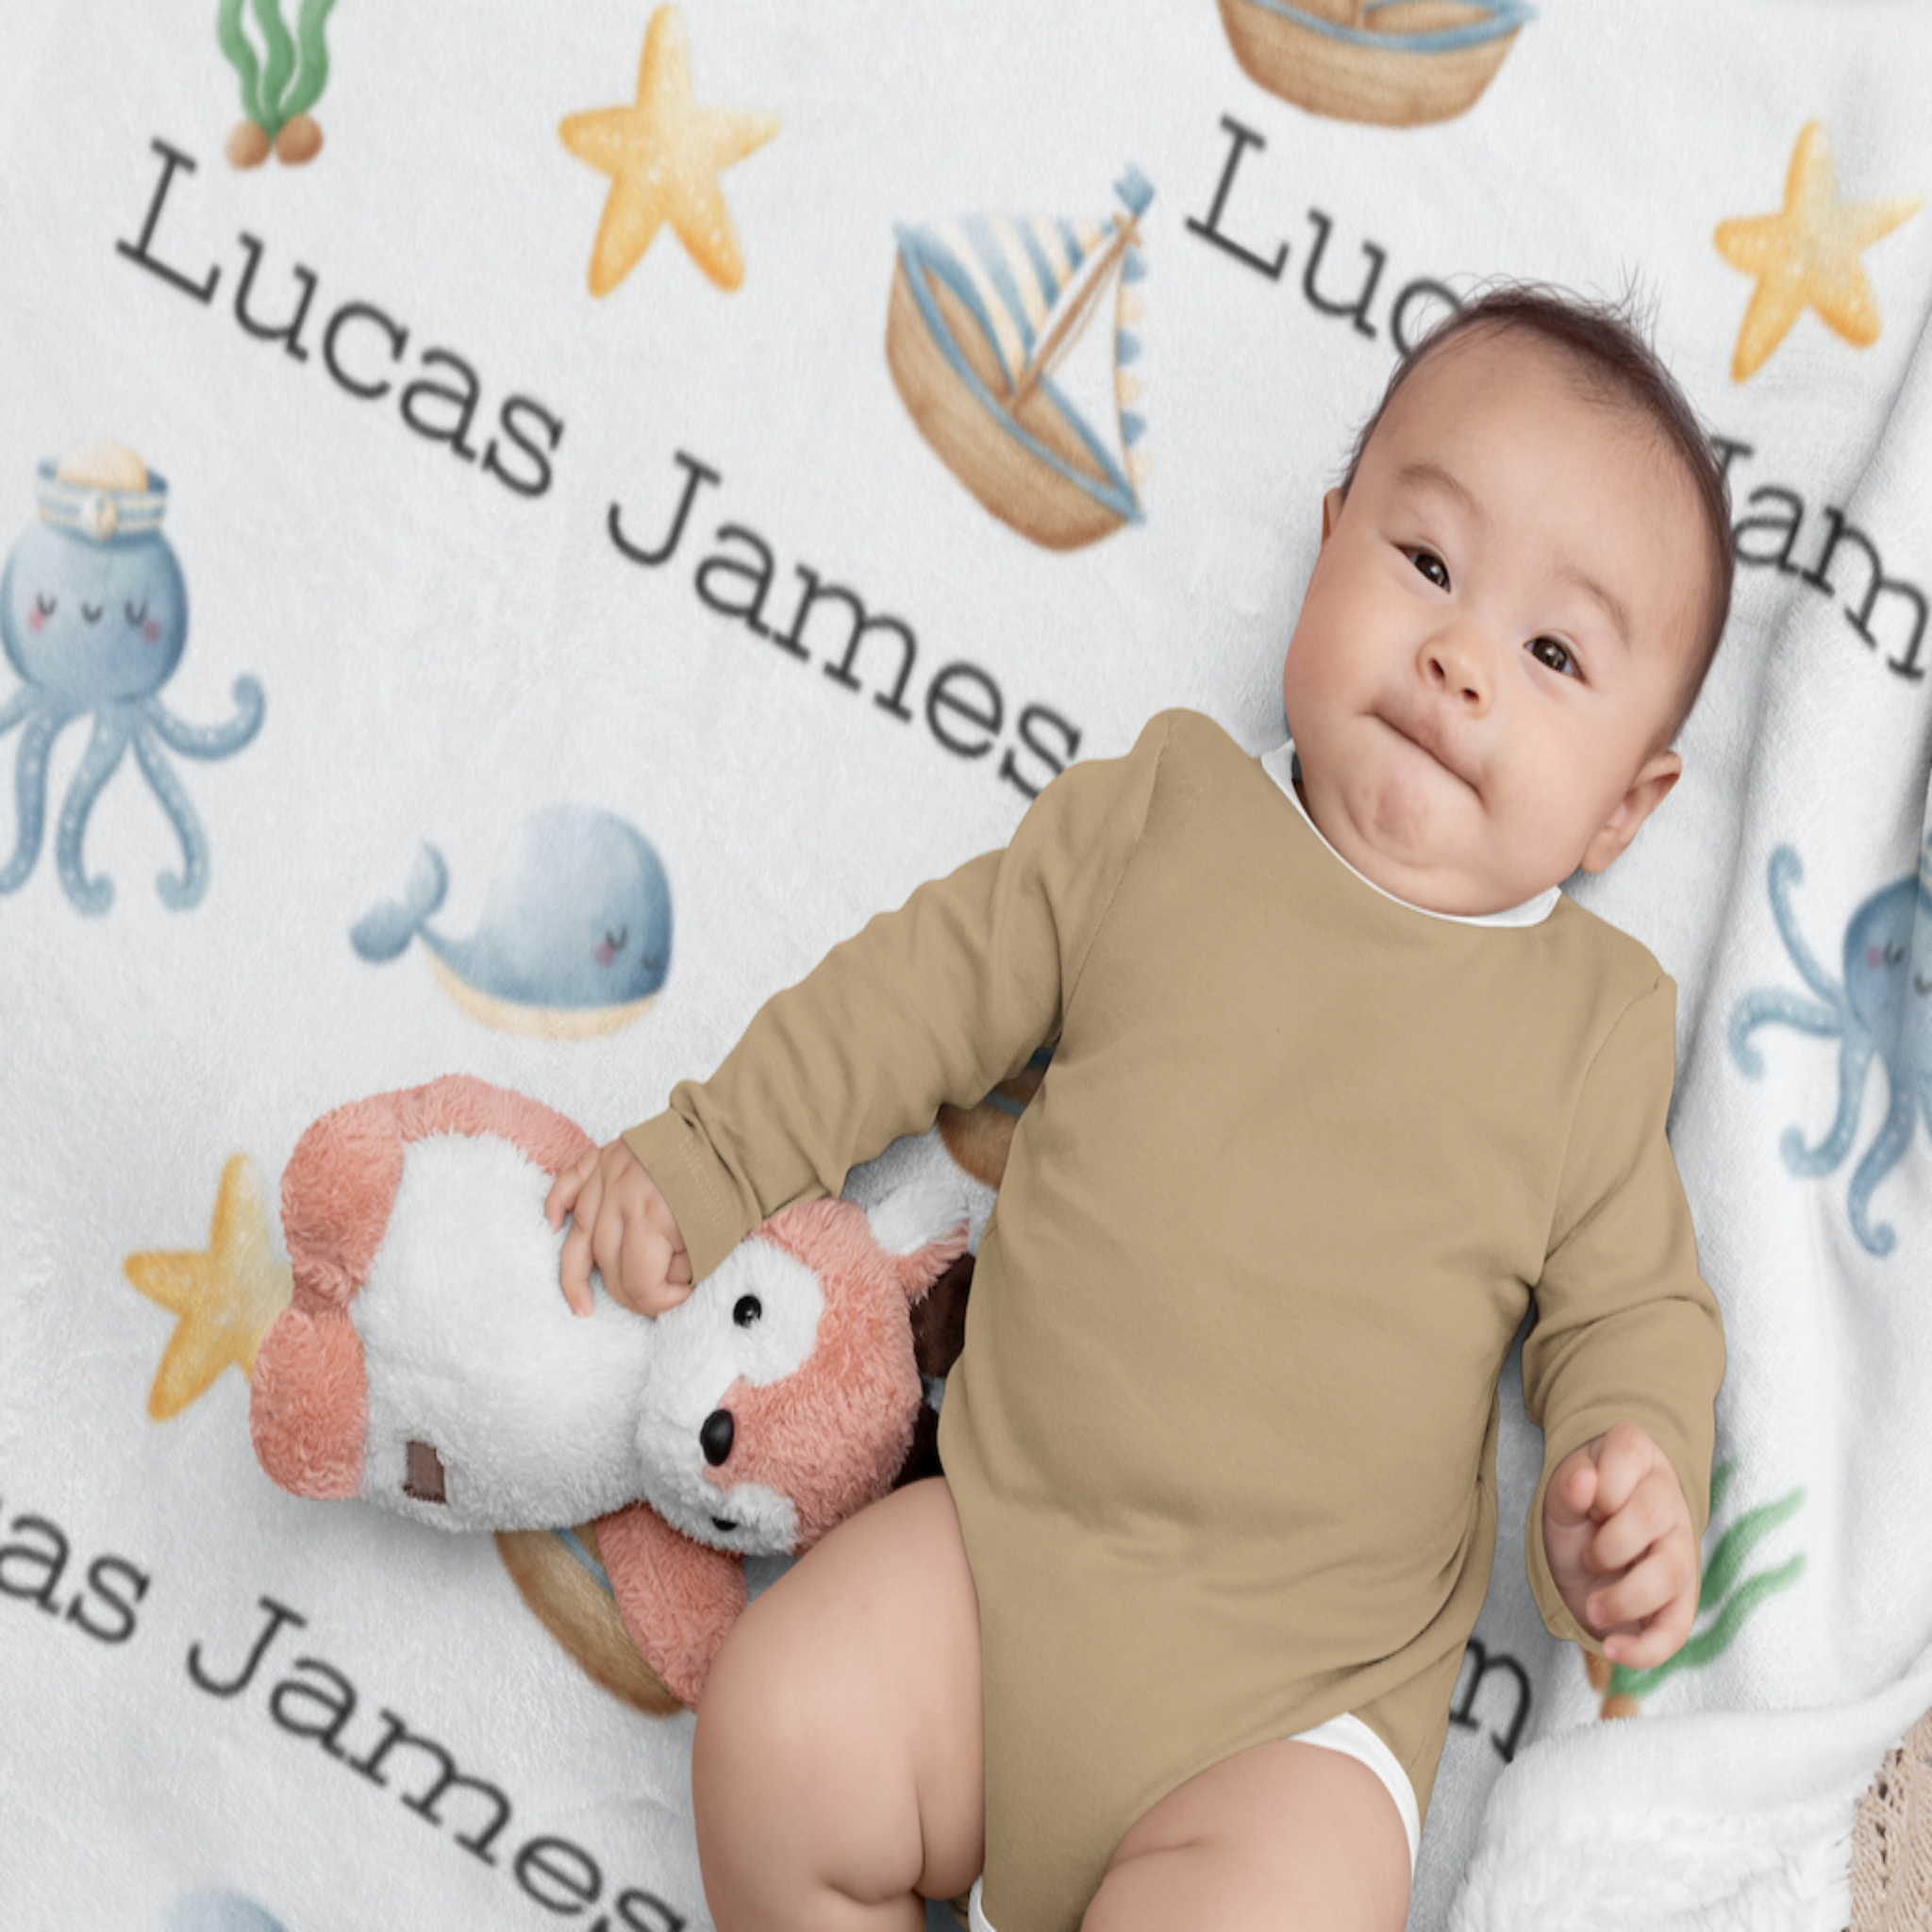  This personalized child's Sea blanket has a baby laying on top of the blanket holding a stuffed animal and wearing a brown onesie. This personalized child's sea blanket has the example name Lucas James spread out six times on the blanket. The blanket has cute whales, octopuses with a cute sailor hat on its head. It has yellow starfish's spread out on the blanket. It has a brown, light blue and yellow ships throughout the blanket. It has green seaweed across the blanket.